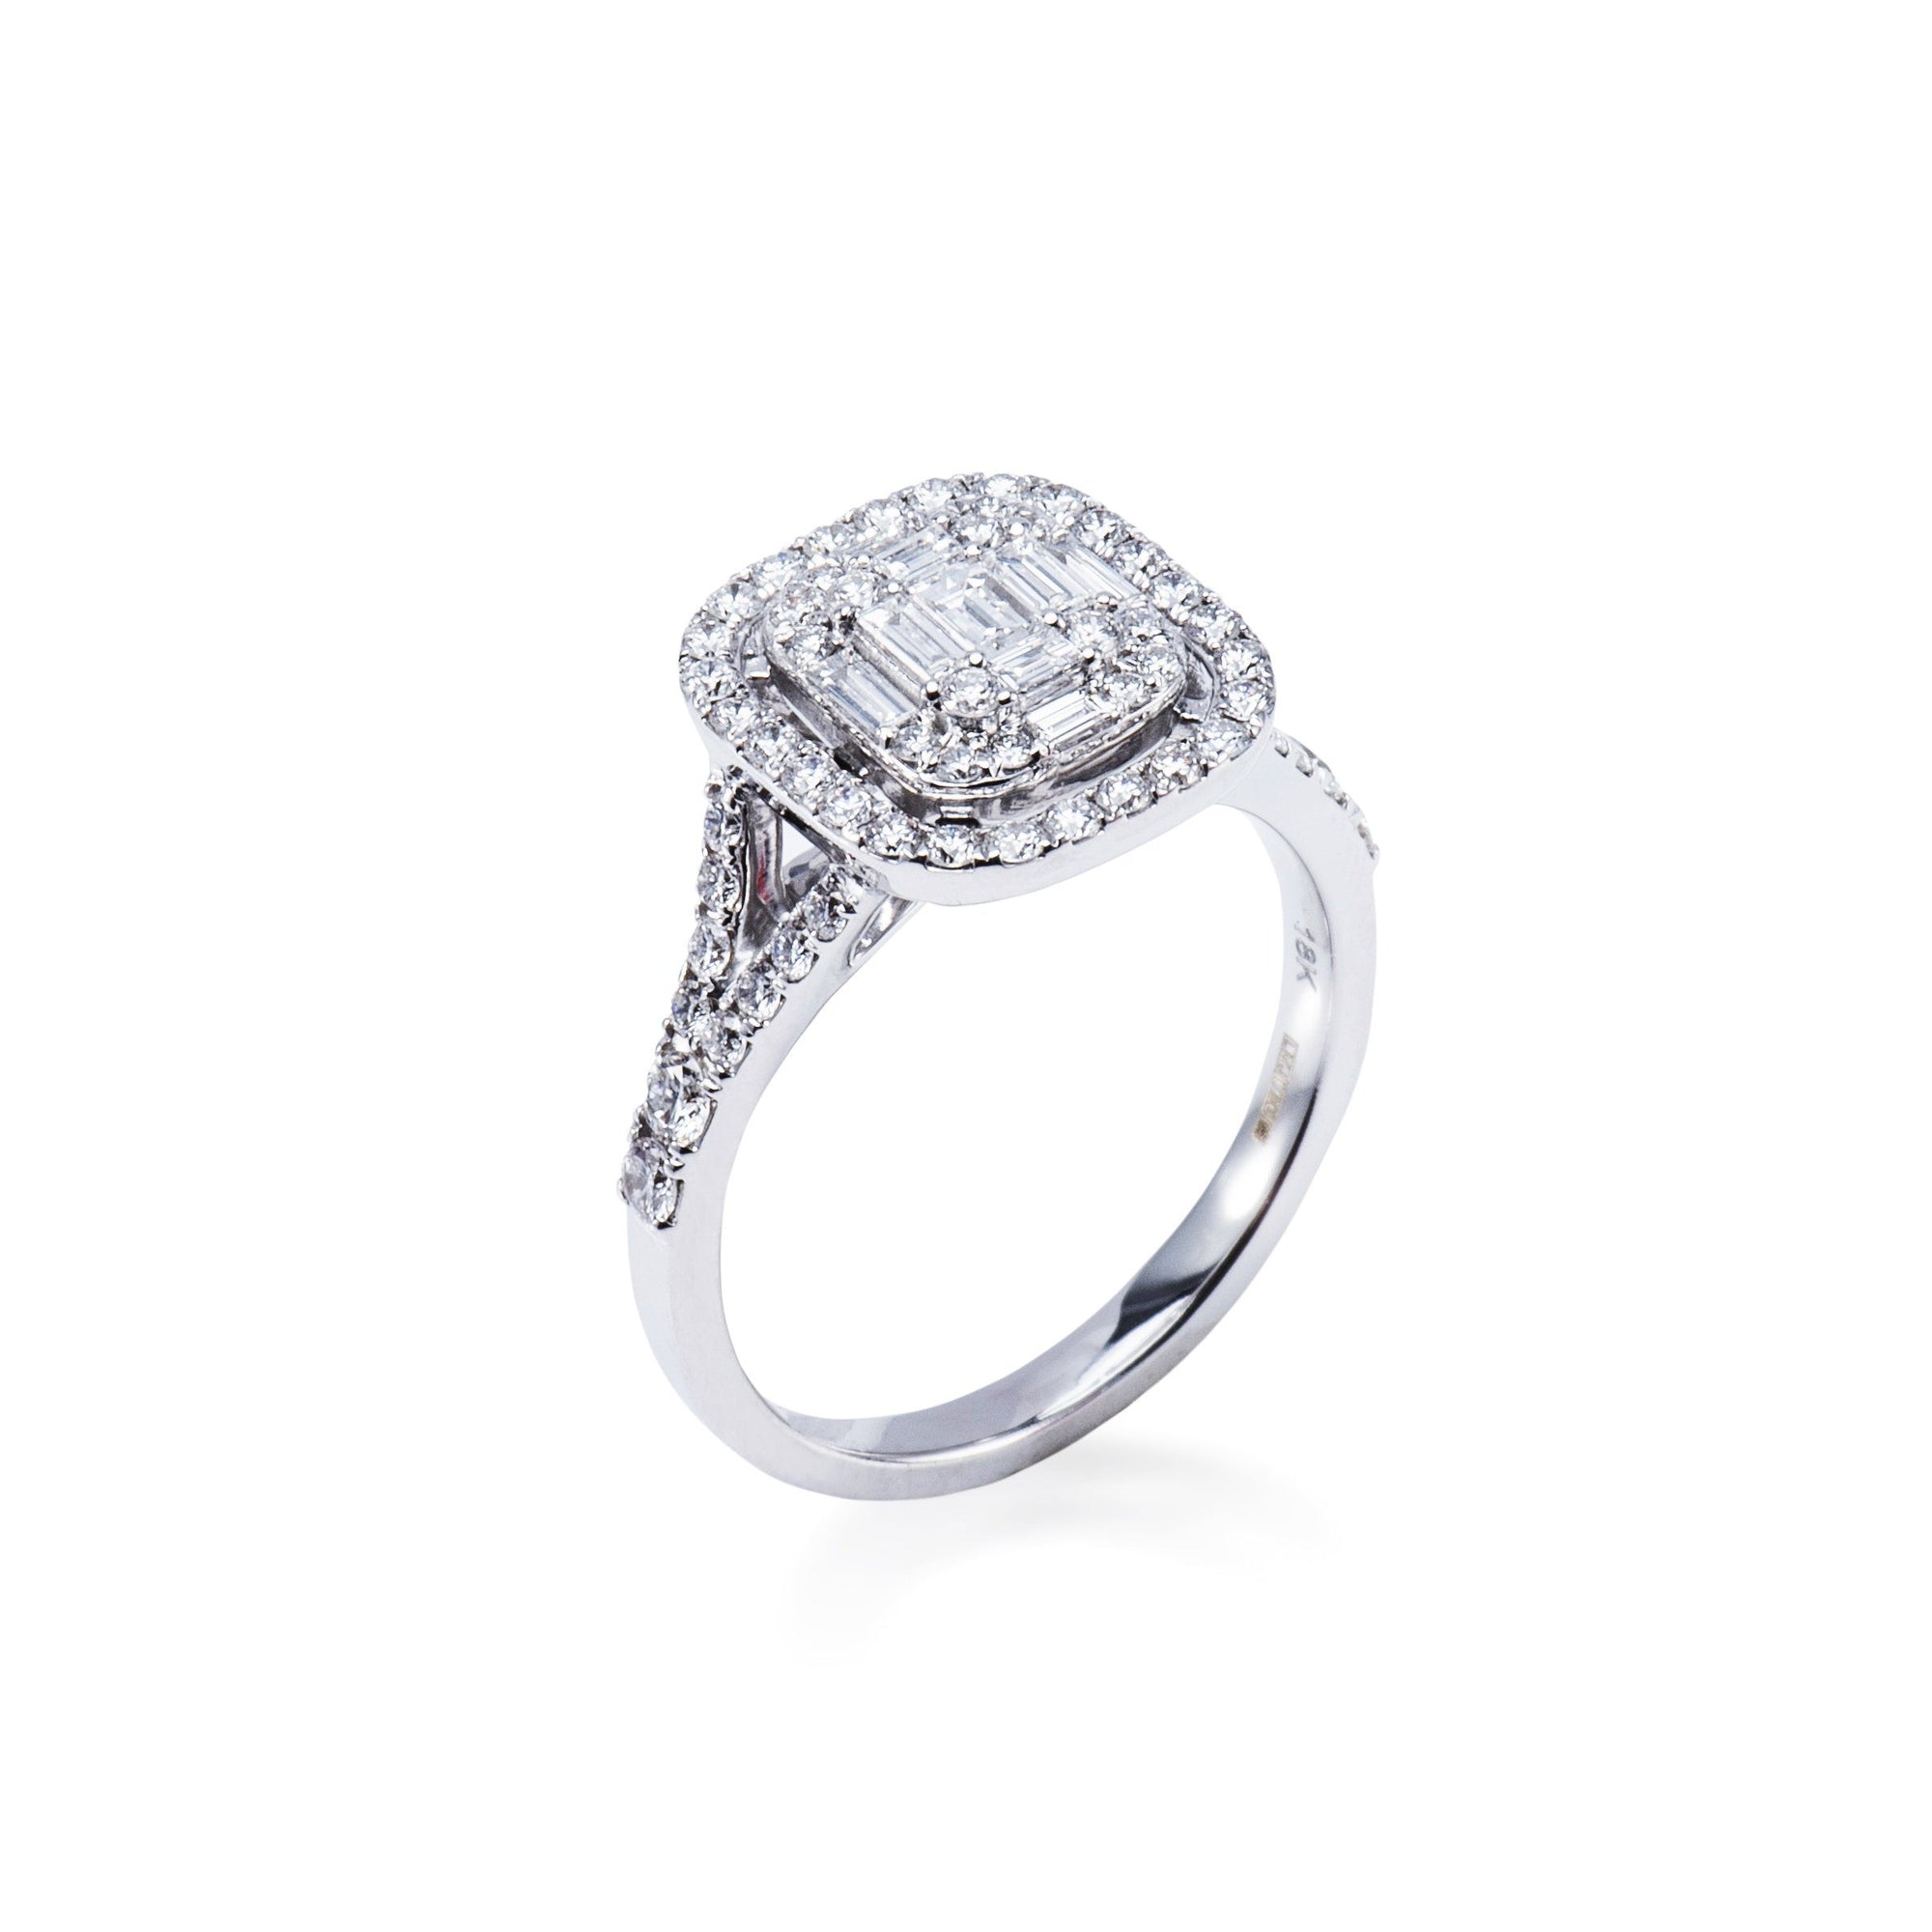 18CT WHITE GOLD DIAMOND CLUSTER RING WITH DIAMONDS ON THE SHOULDERS Aces Jewellers 